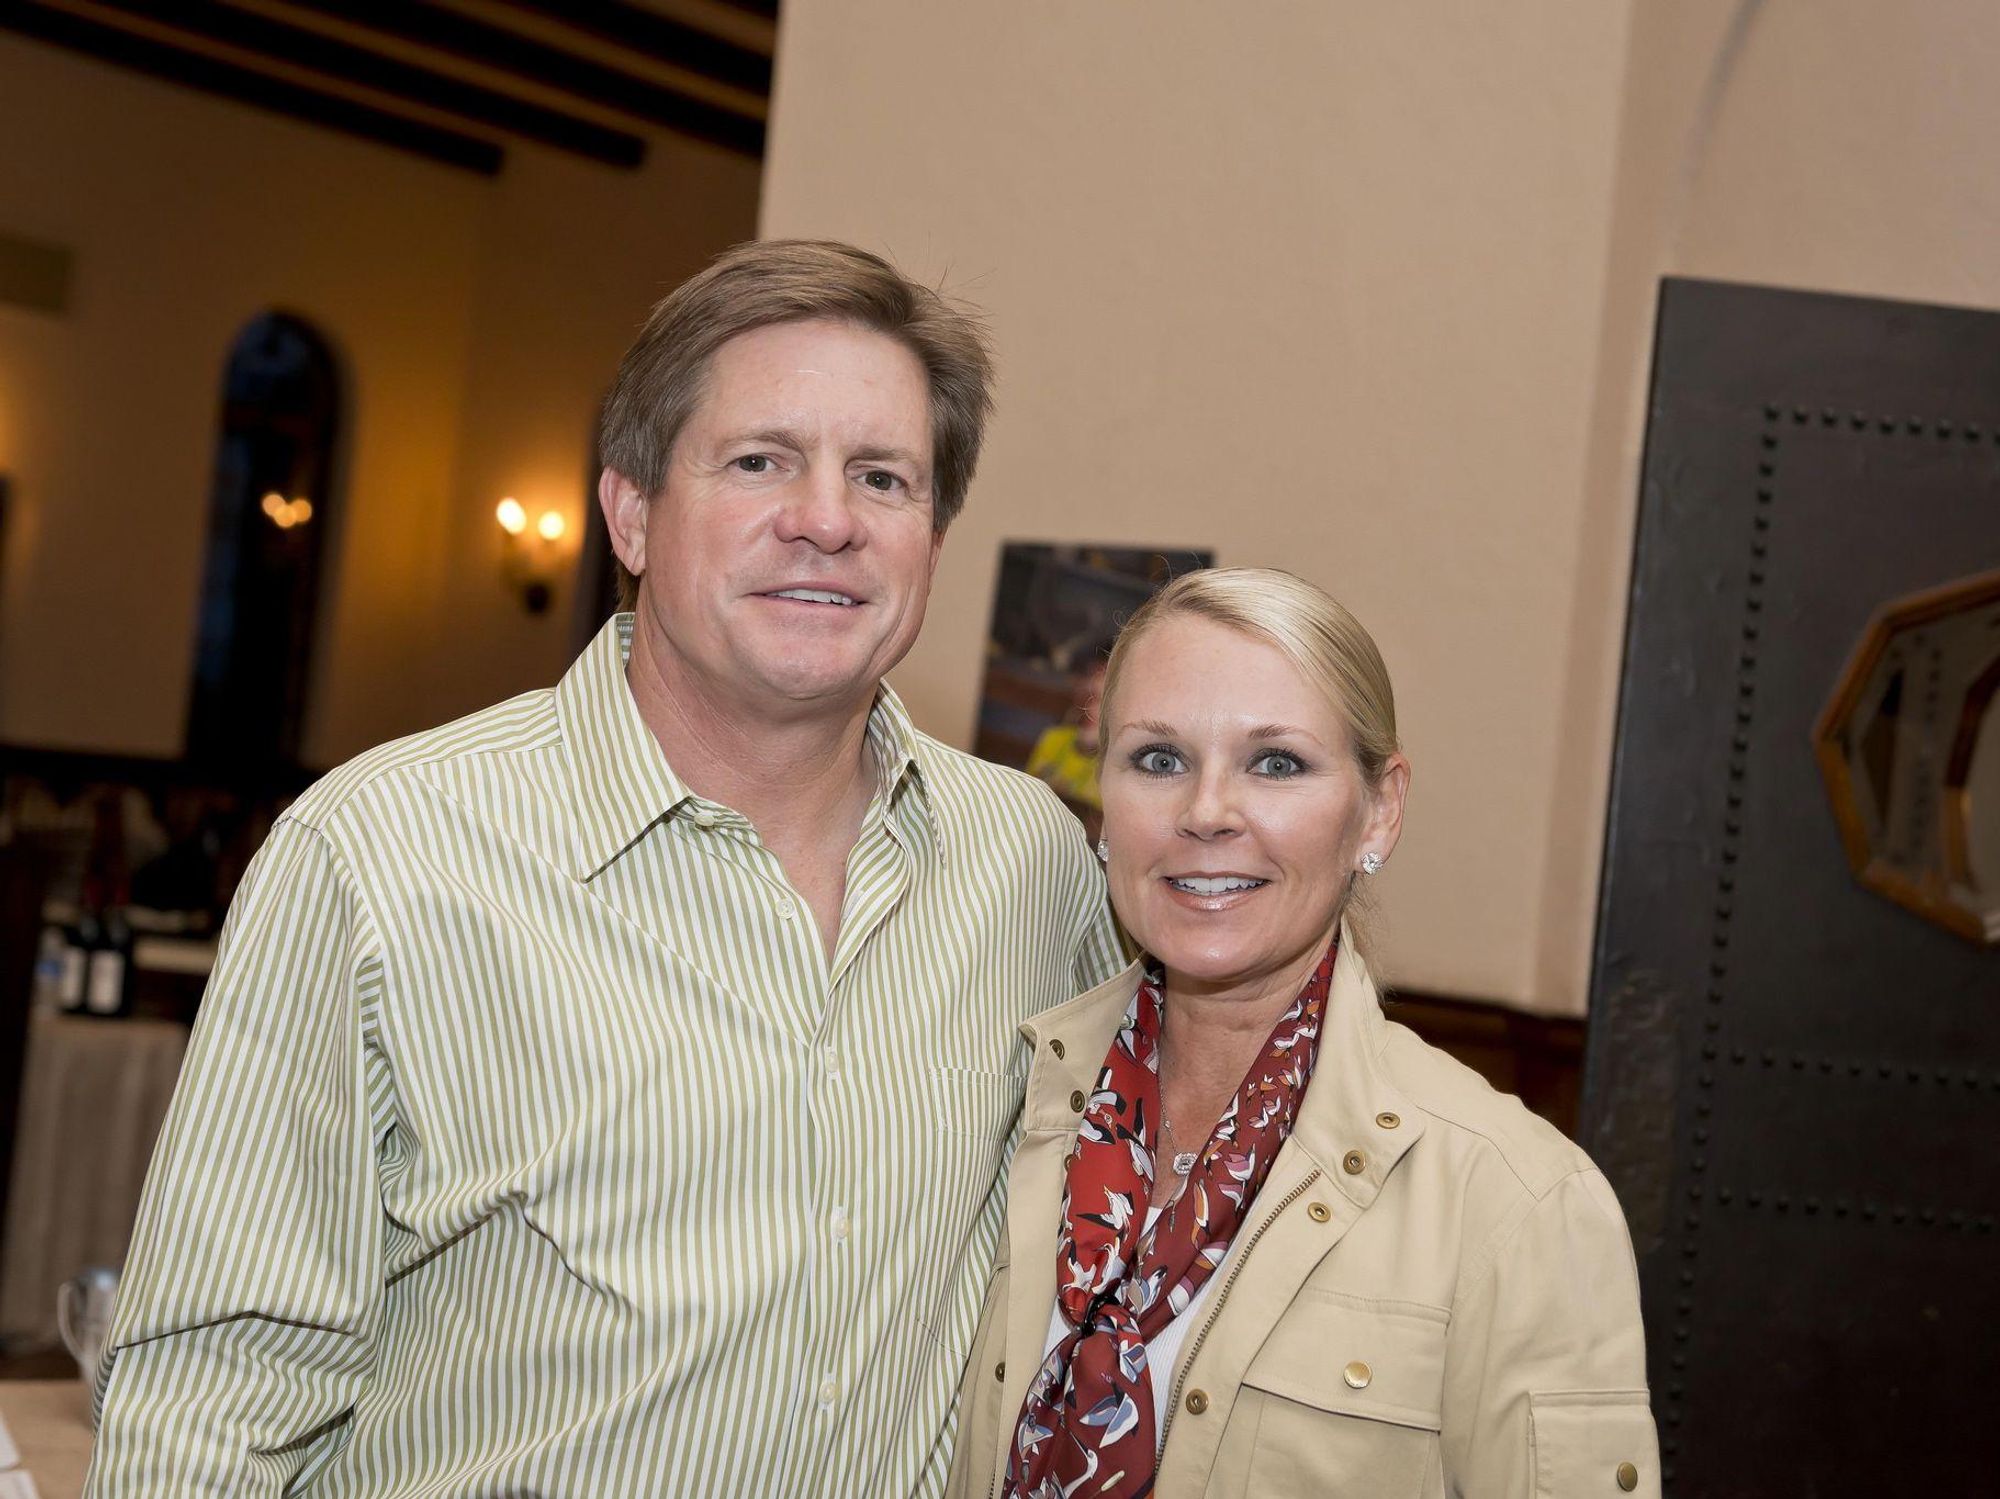 Jeff and Mindy Hildebrand at the Camp for All event September 2014